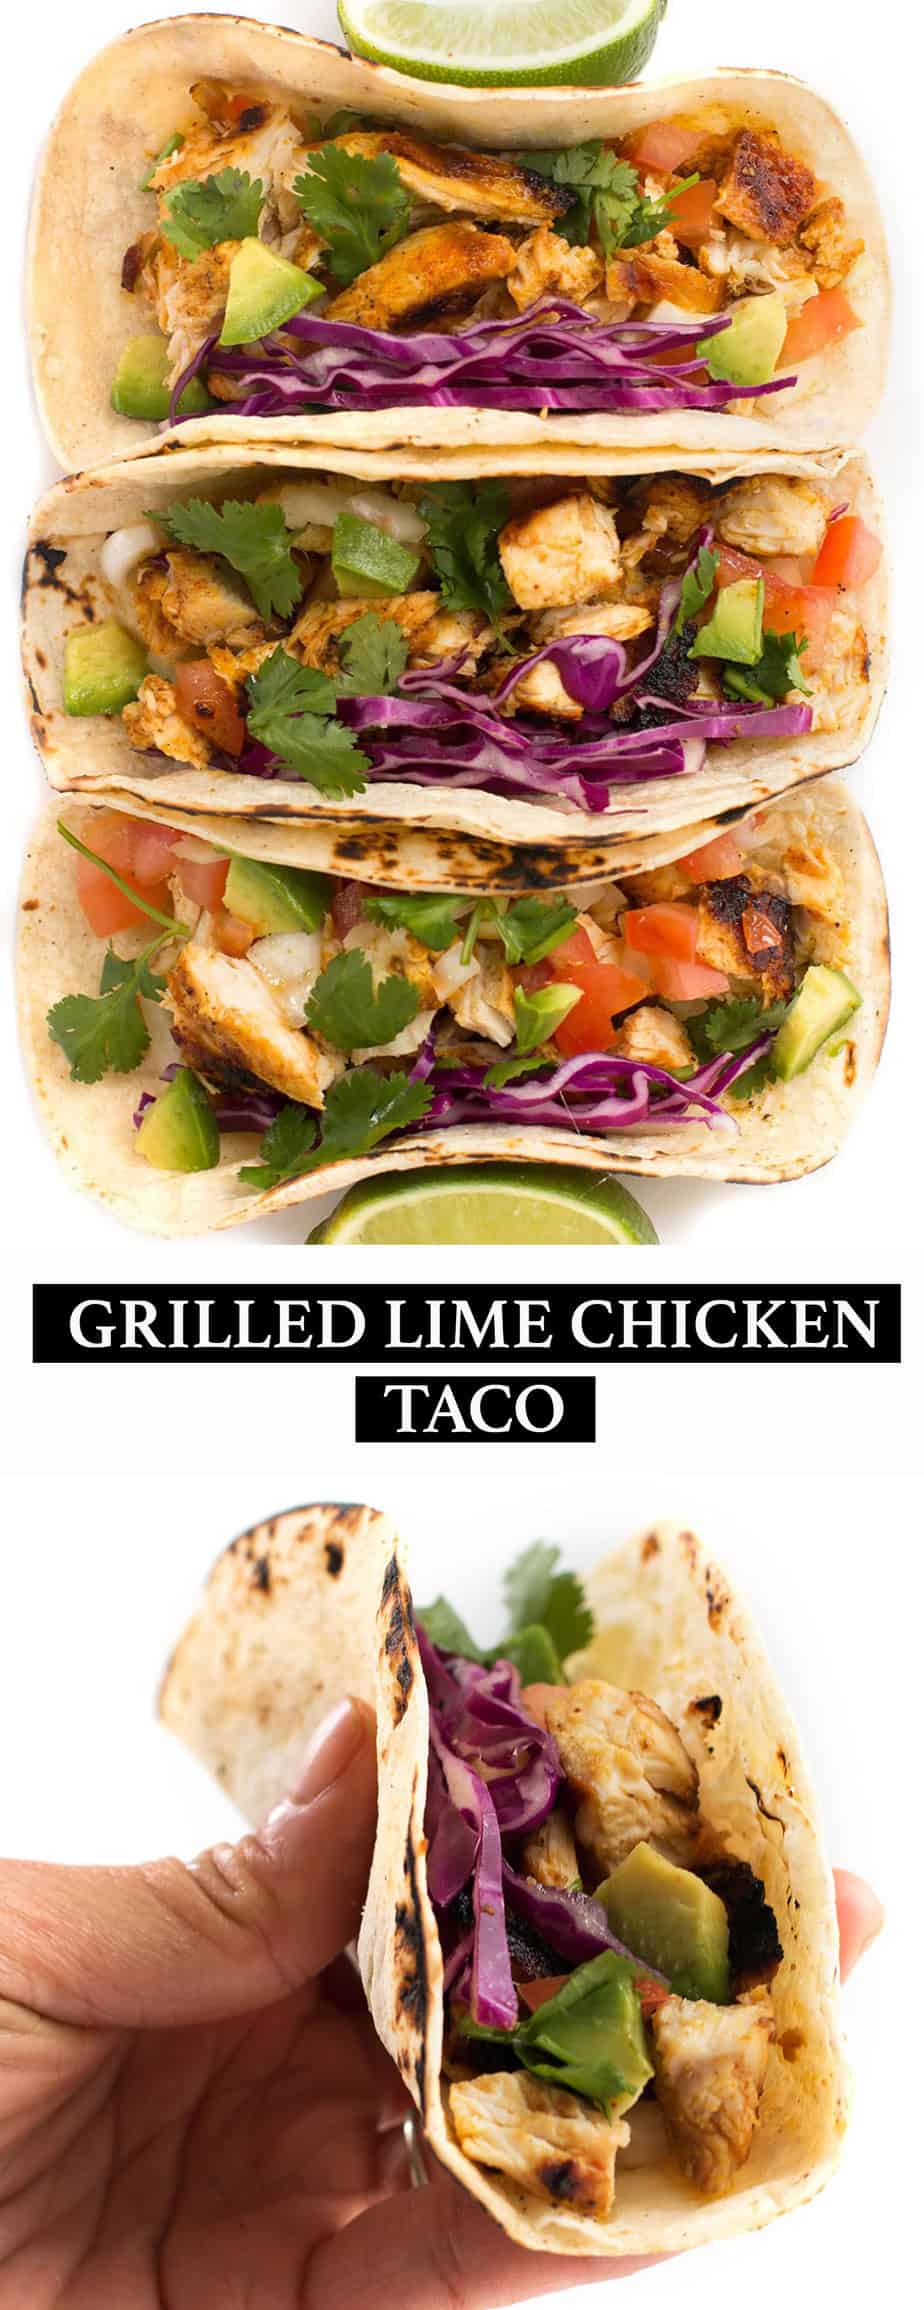 GRILLED-LIME-CHICKEN-TACO-PINTEREST